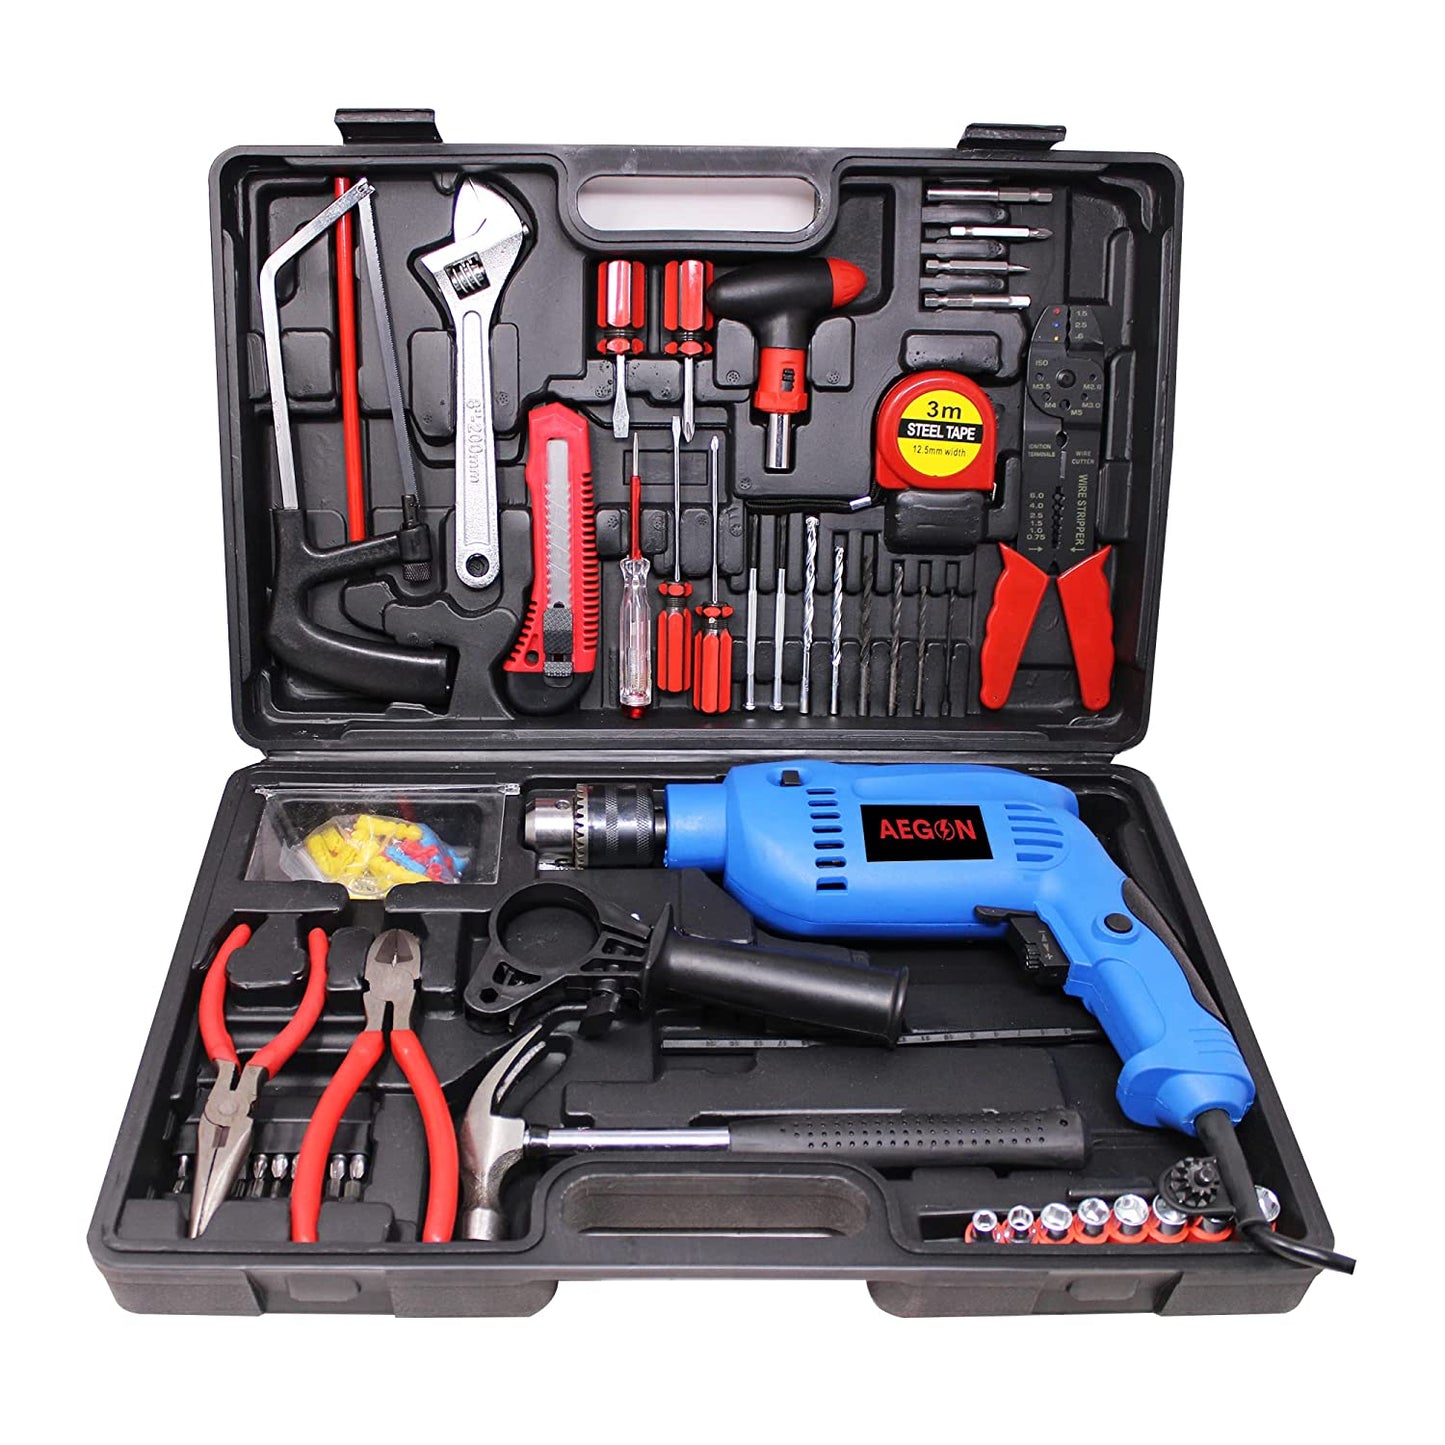 Aegon ADM13MM-Blue 750W Impact Drill Machine/Screwdriver & Hand Tools Kit with 121 Accessories for DIY, Home and Professional Use